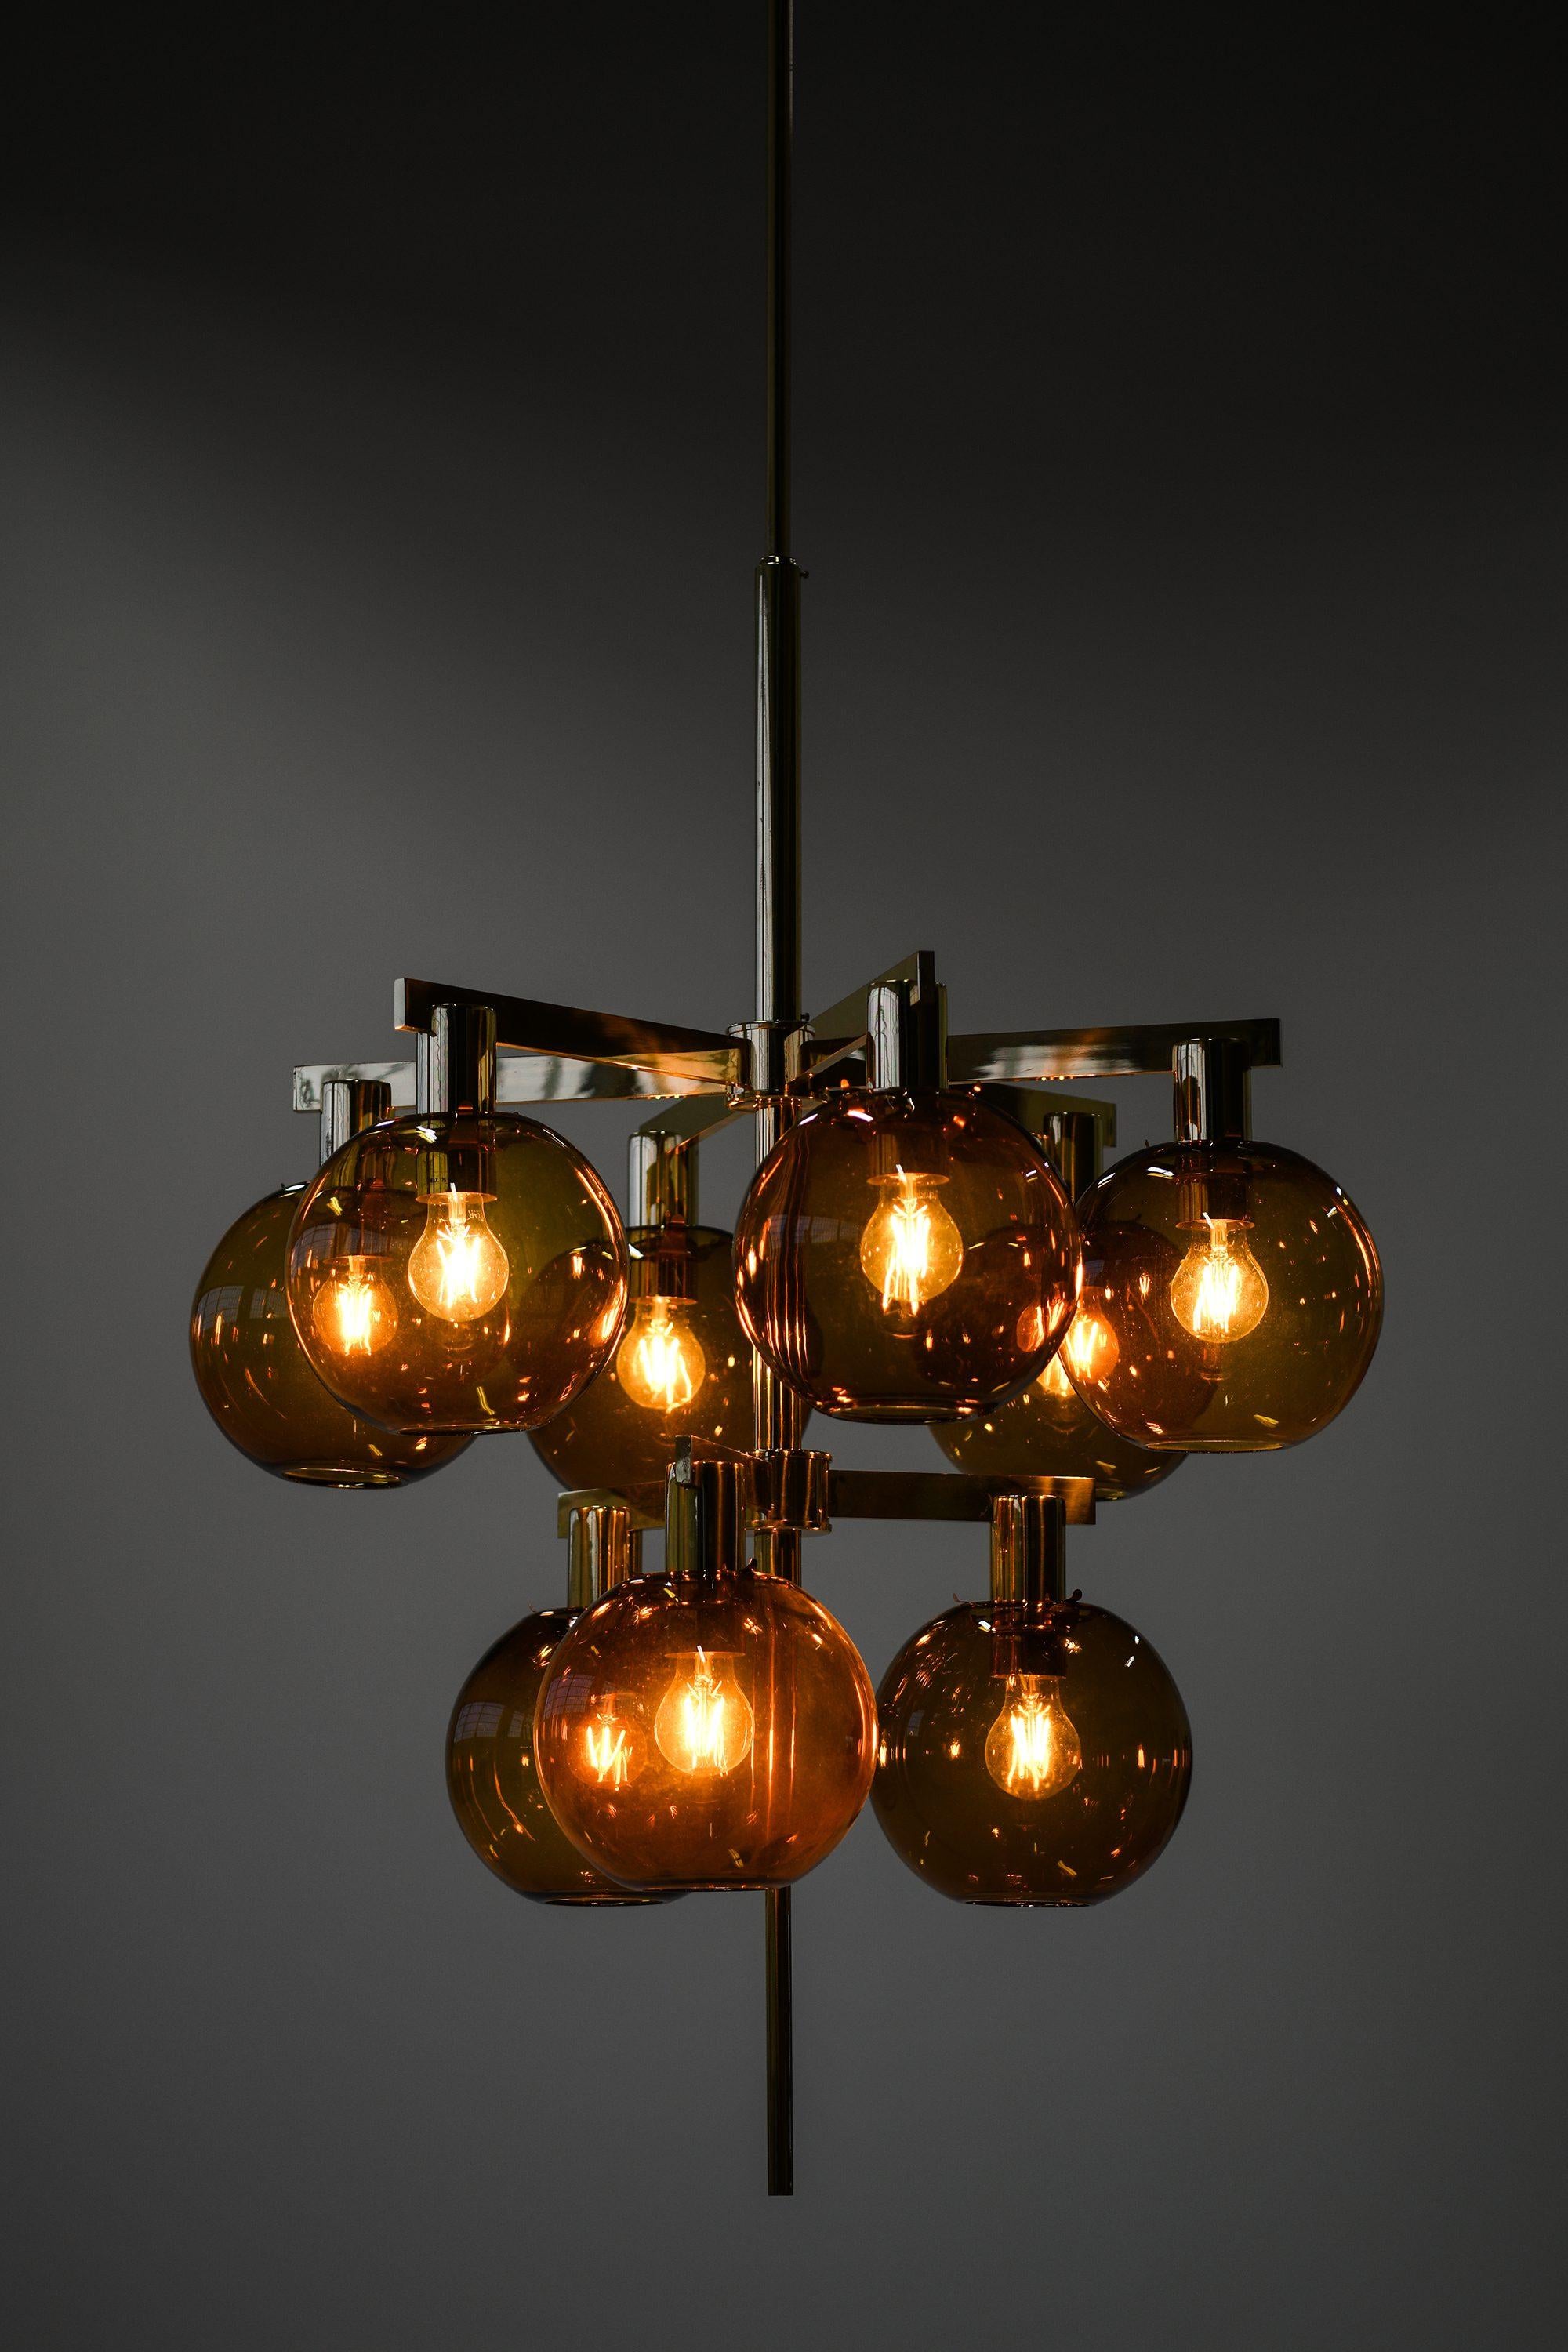 Ceiling Lamp Chandelier in Brass and Amber Glass by Hans-Agne Jakobsson, 1950's In Good Condition For Sale In Limhamn, Skåne län